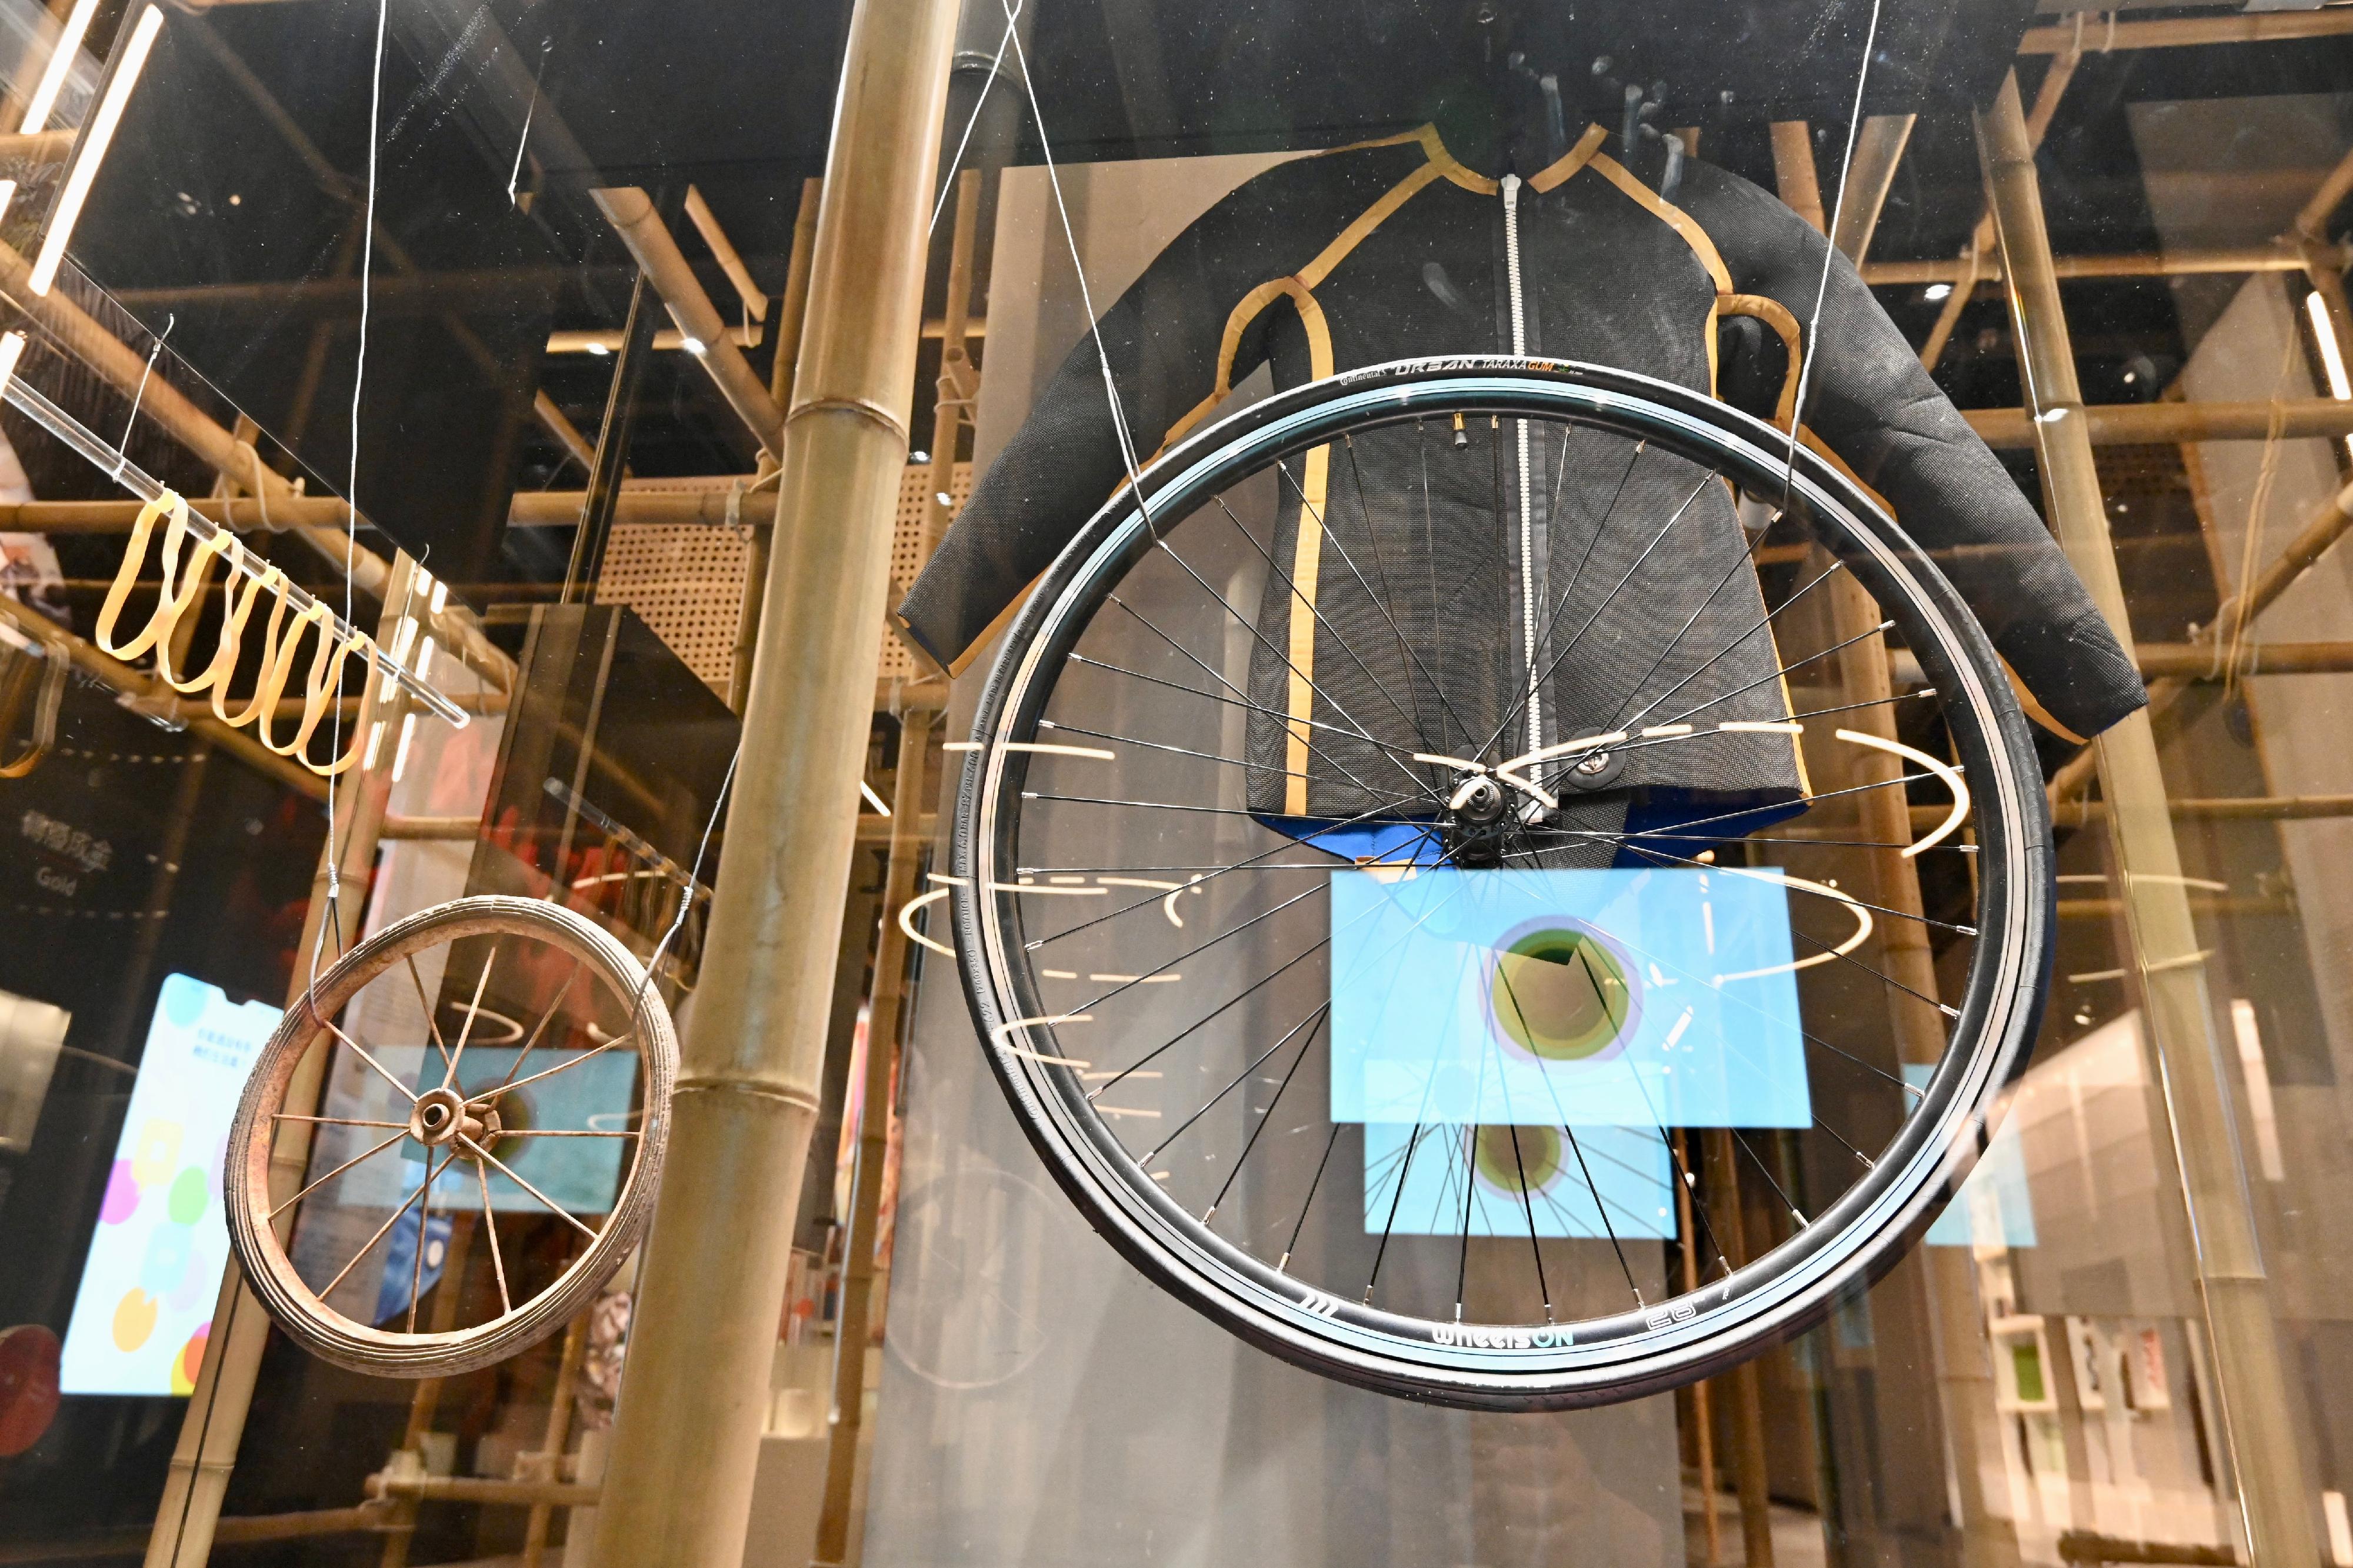 The Hong Kong Science Museum will present the "Material Tales - The Life of Things" exhibition starting from tomorrow (May 19). Photo shows a child's bicycle wheel (left) made from rubber, and a Taraxa bike tyre (right) made from rubber extracted from the Russian dandelion.